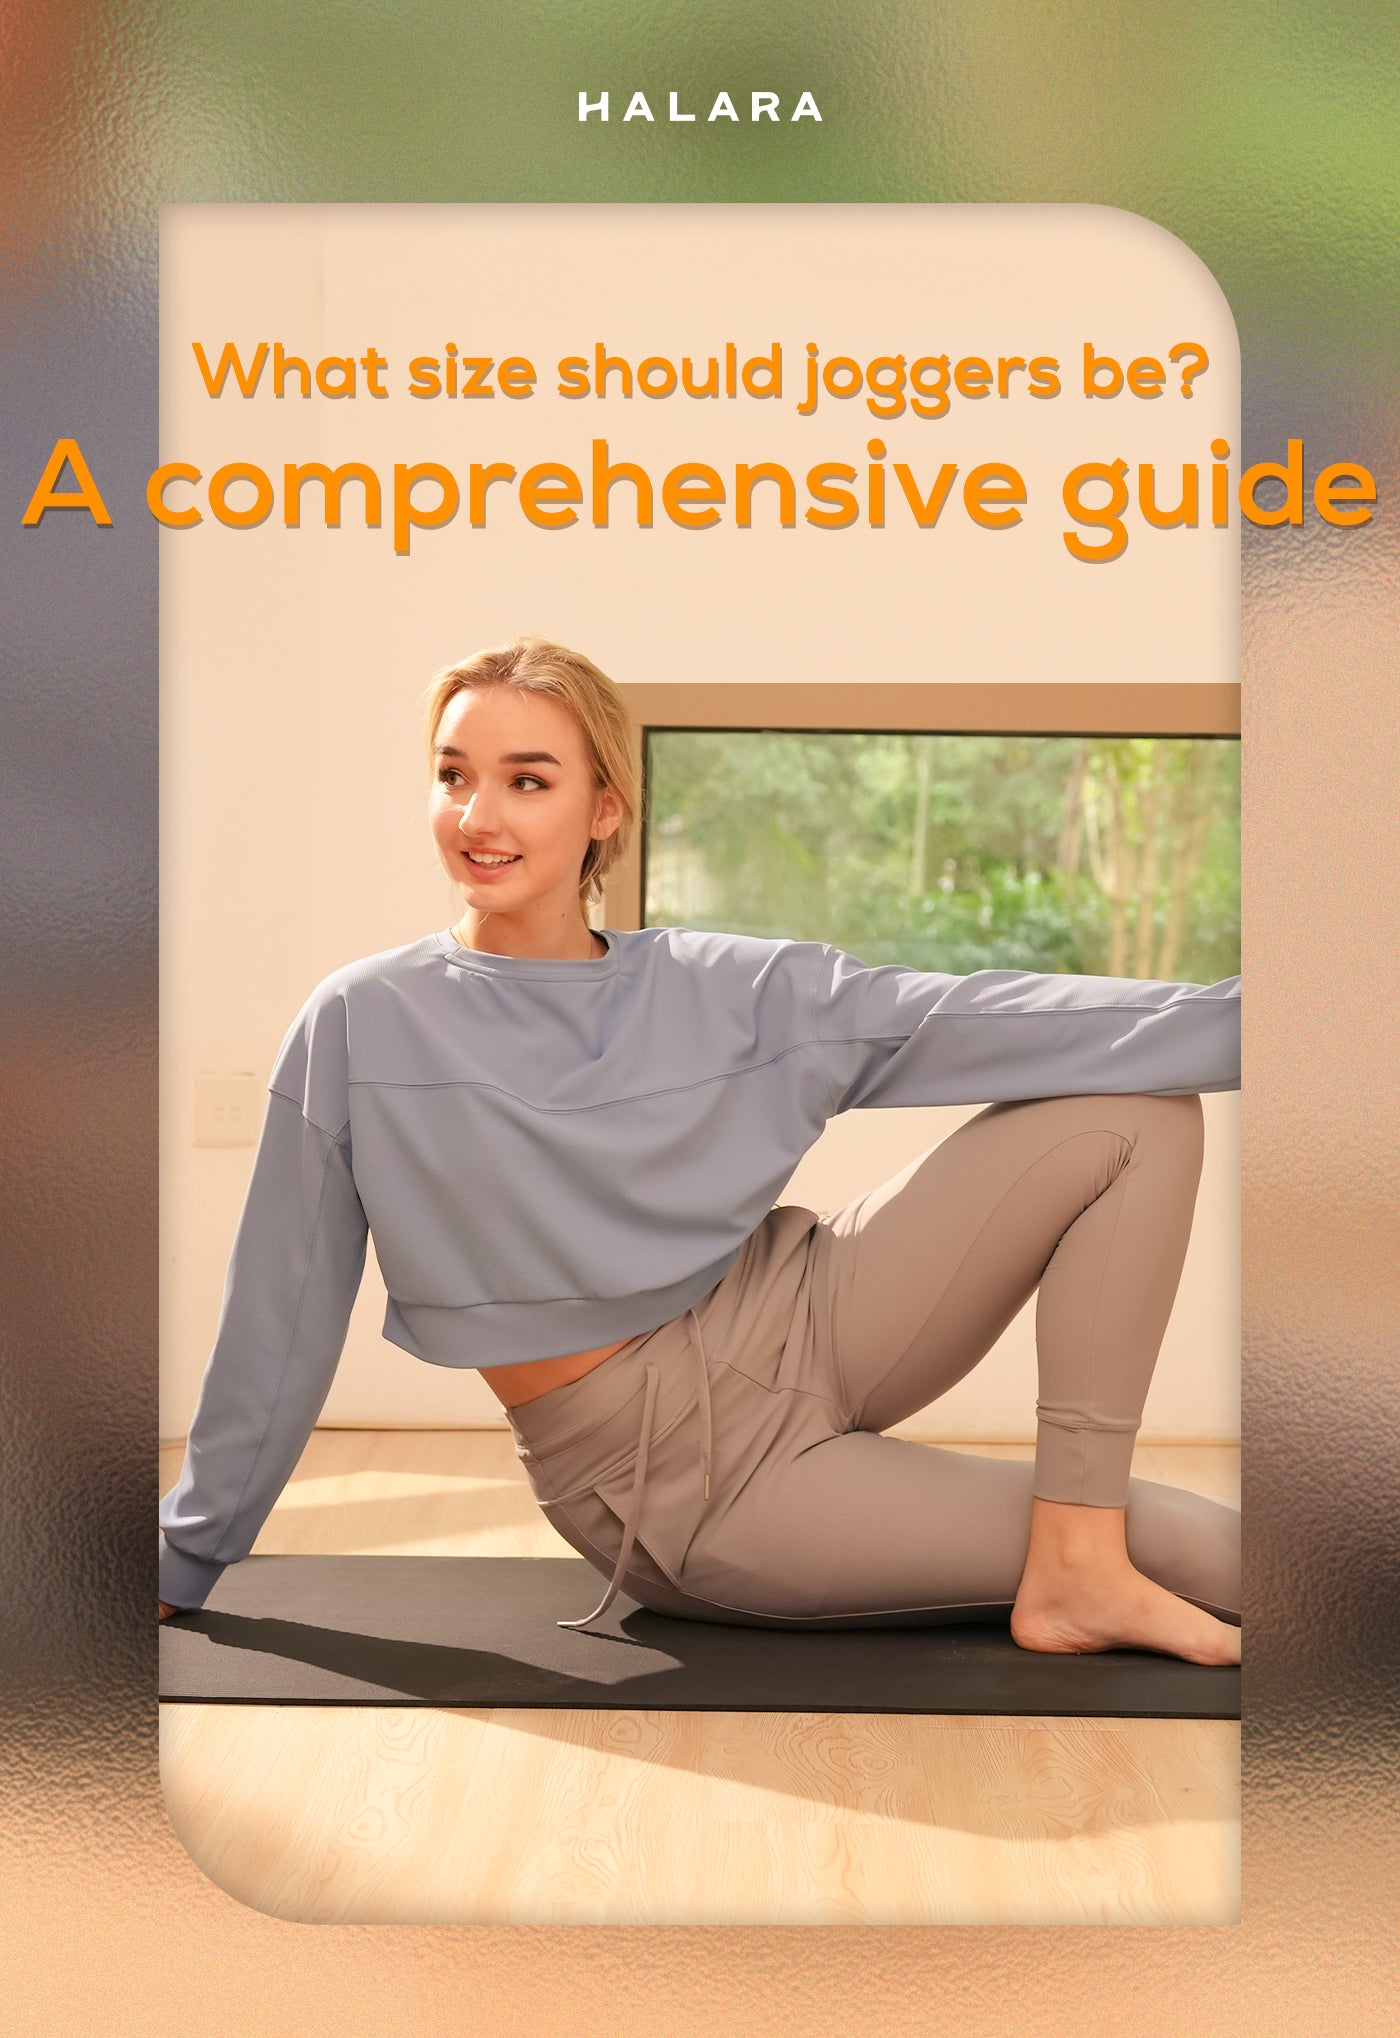 What size should joggers be? A comprehensive guide